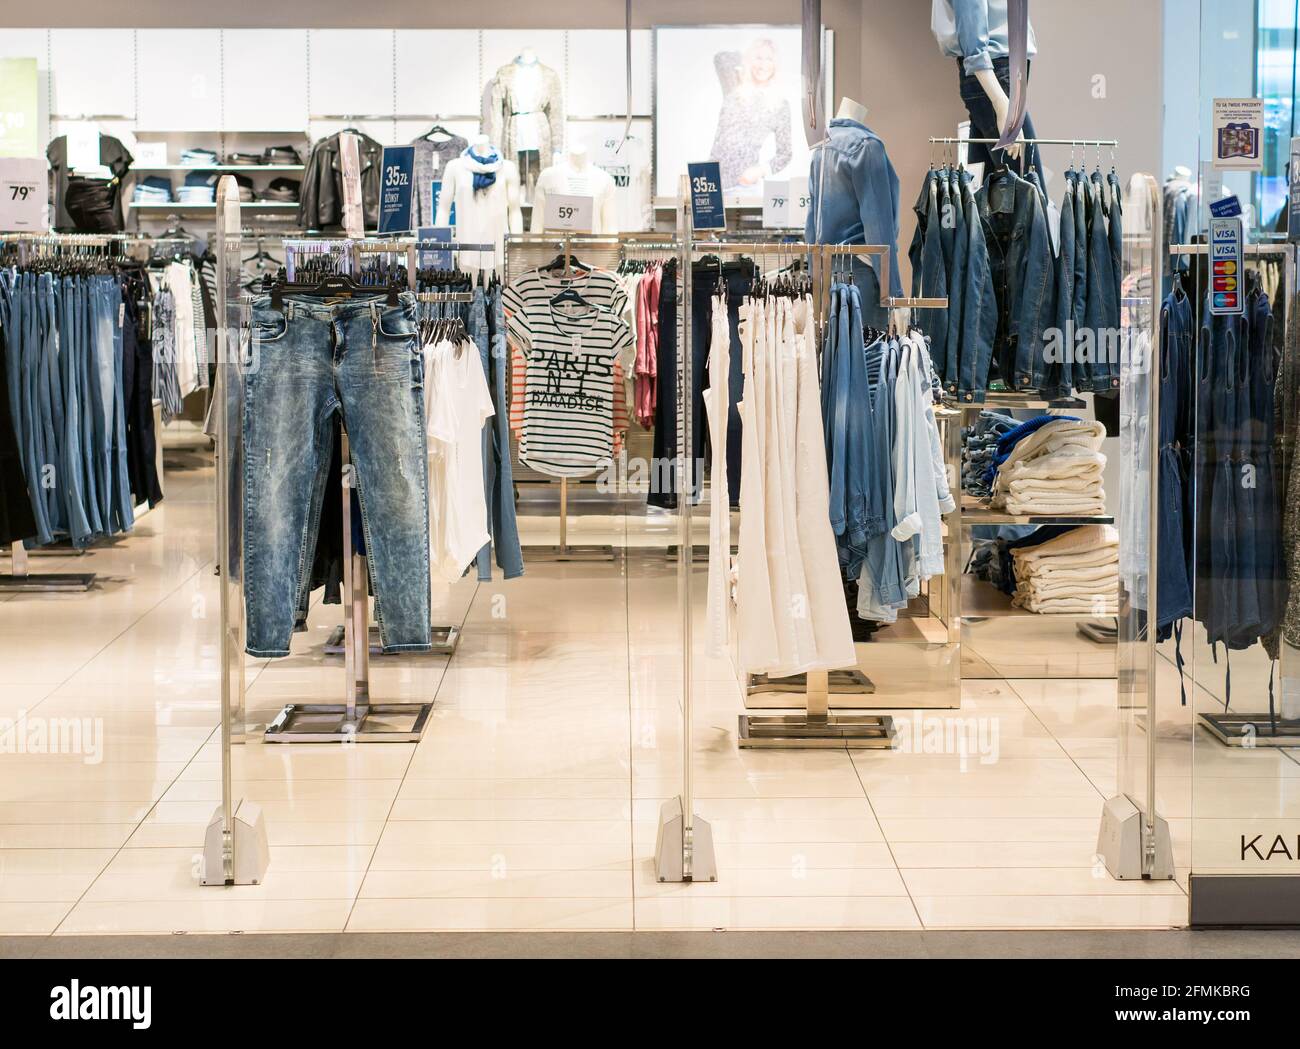 POZNAN, POLAND - Feb 16, 2014: Entrance of a KappAhl clothing store in the  Malta shopping mall Stock Photo - Alamy